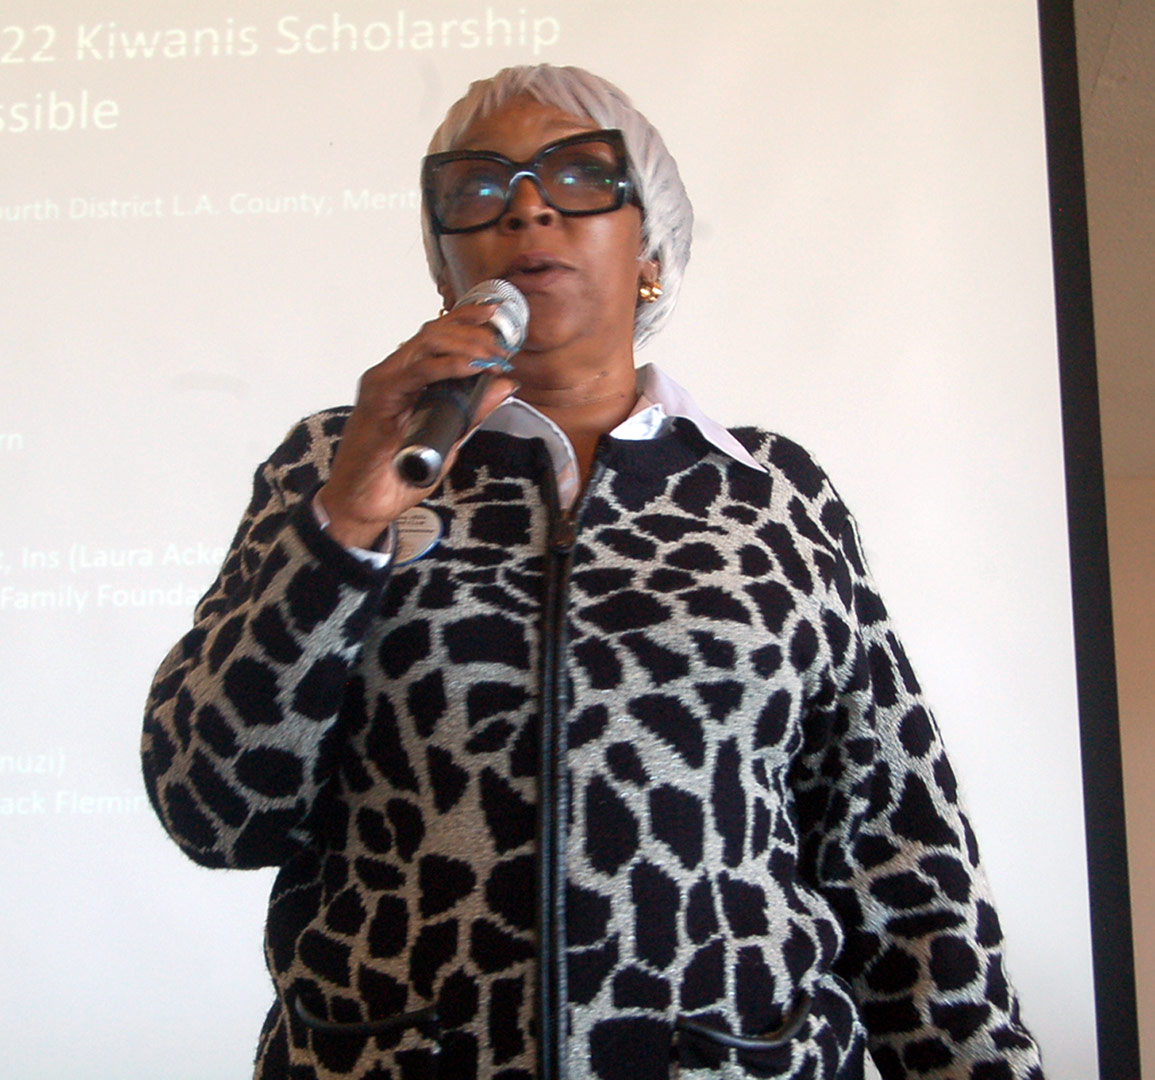 Cheryl Rivers-Moore, President, Welcoming Scholars and Parents